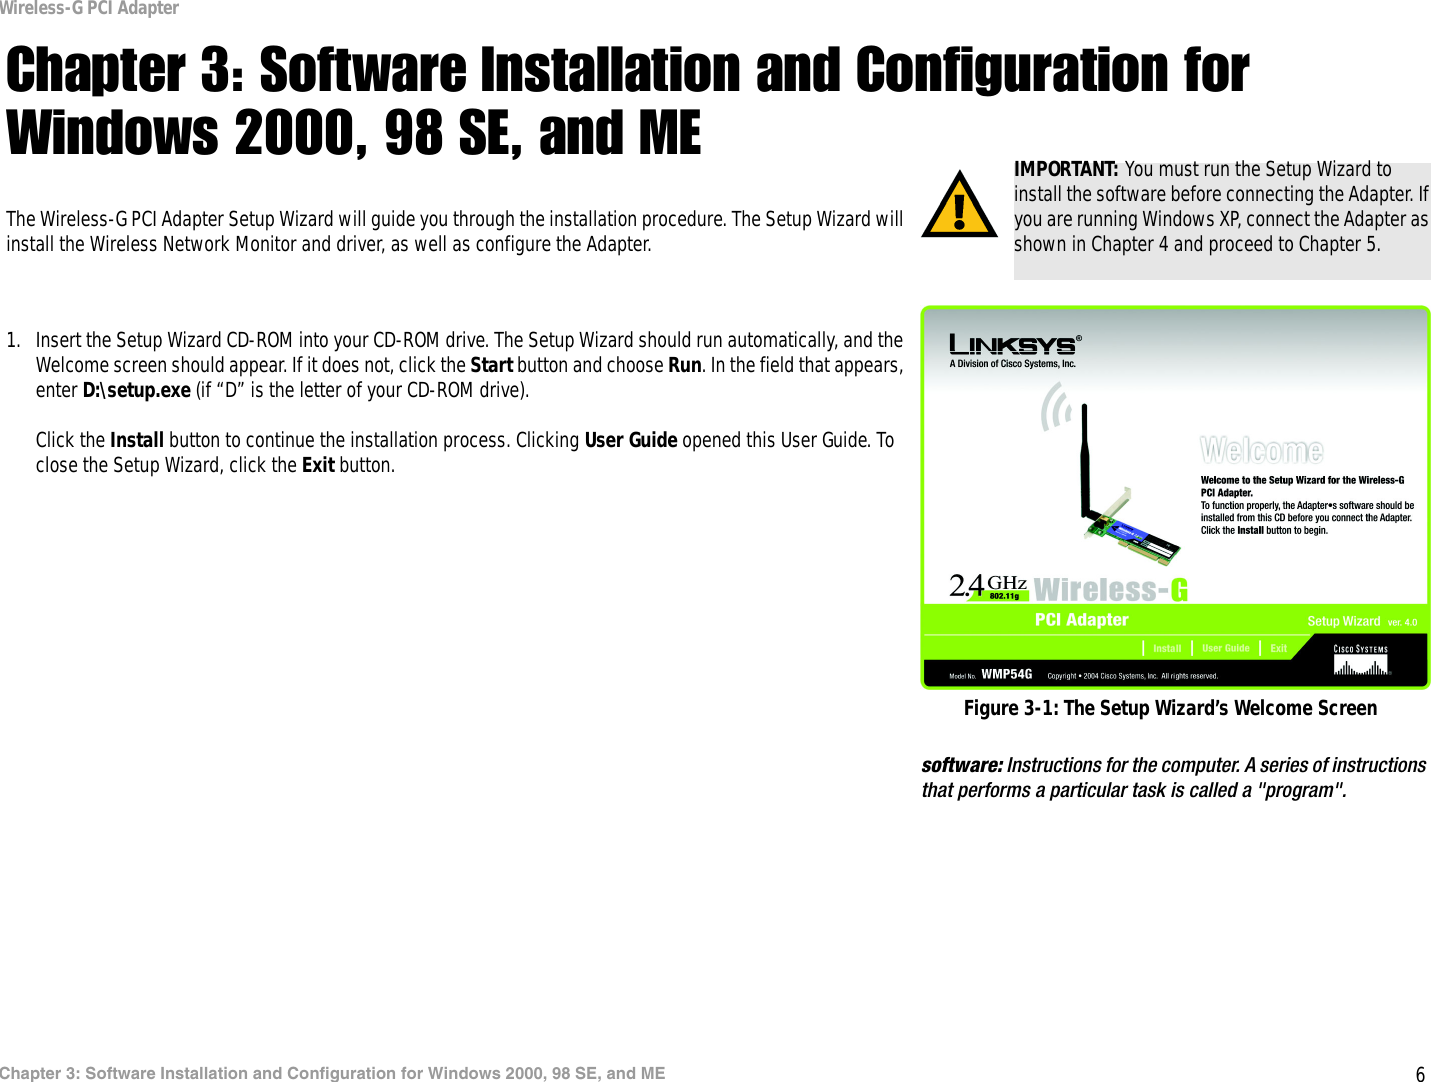 6Chapter 3: Software Installation and Configuration for Windows 2000, 98 SE, and MEWireless-G PCI AdapterChapter 3: Software Installation and Configuration for Windows 2000, 98 SE, and METhe Wireless-G PCI Adapter Setup Wizard will guide you through the installation procedure. The Setup Wizard will install the Wireless Network Monitor and driver, as well as configure the Adapter.1. Insert the Setup Wizard CD-ROM into your CD-ROM drive. The Setup Wizard should run automatically, and the Welcome screen should appear. If it does not, click the Start button and choose Run. In the field that appears, enter D:\setup.exe (if “D” is the letter of your CD-ROM drive).Click the Install button to continue the installation process. Clicking User Guide opened this User Guide. To close the Setup Wizard, click the Exit button. IMPORTANT: You must run the Setup Wizard to install the software before connecting the Adapter. If you are running Windows XP, connect the Adapter as shown in Chapter 4 and proceed to Chapter 5.Figure 3-1: The Setup Wizard’s Welcome Screensoftware: Instructions for the computer. A series of instructions that performs a particular task is called a &quot;program&quot;.